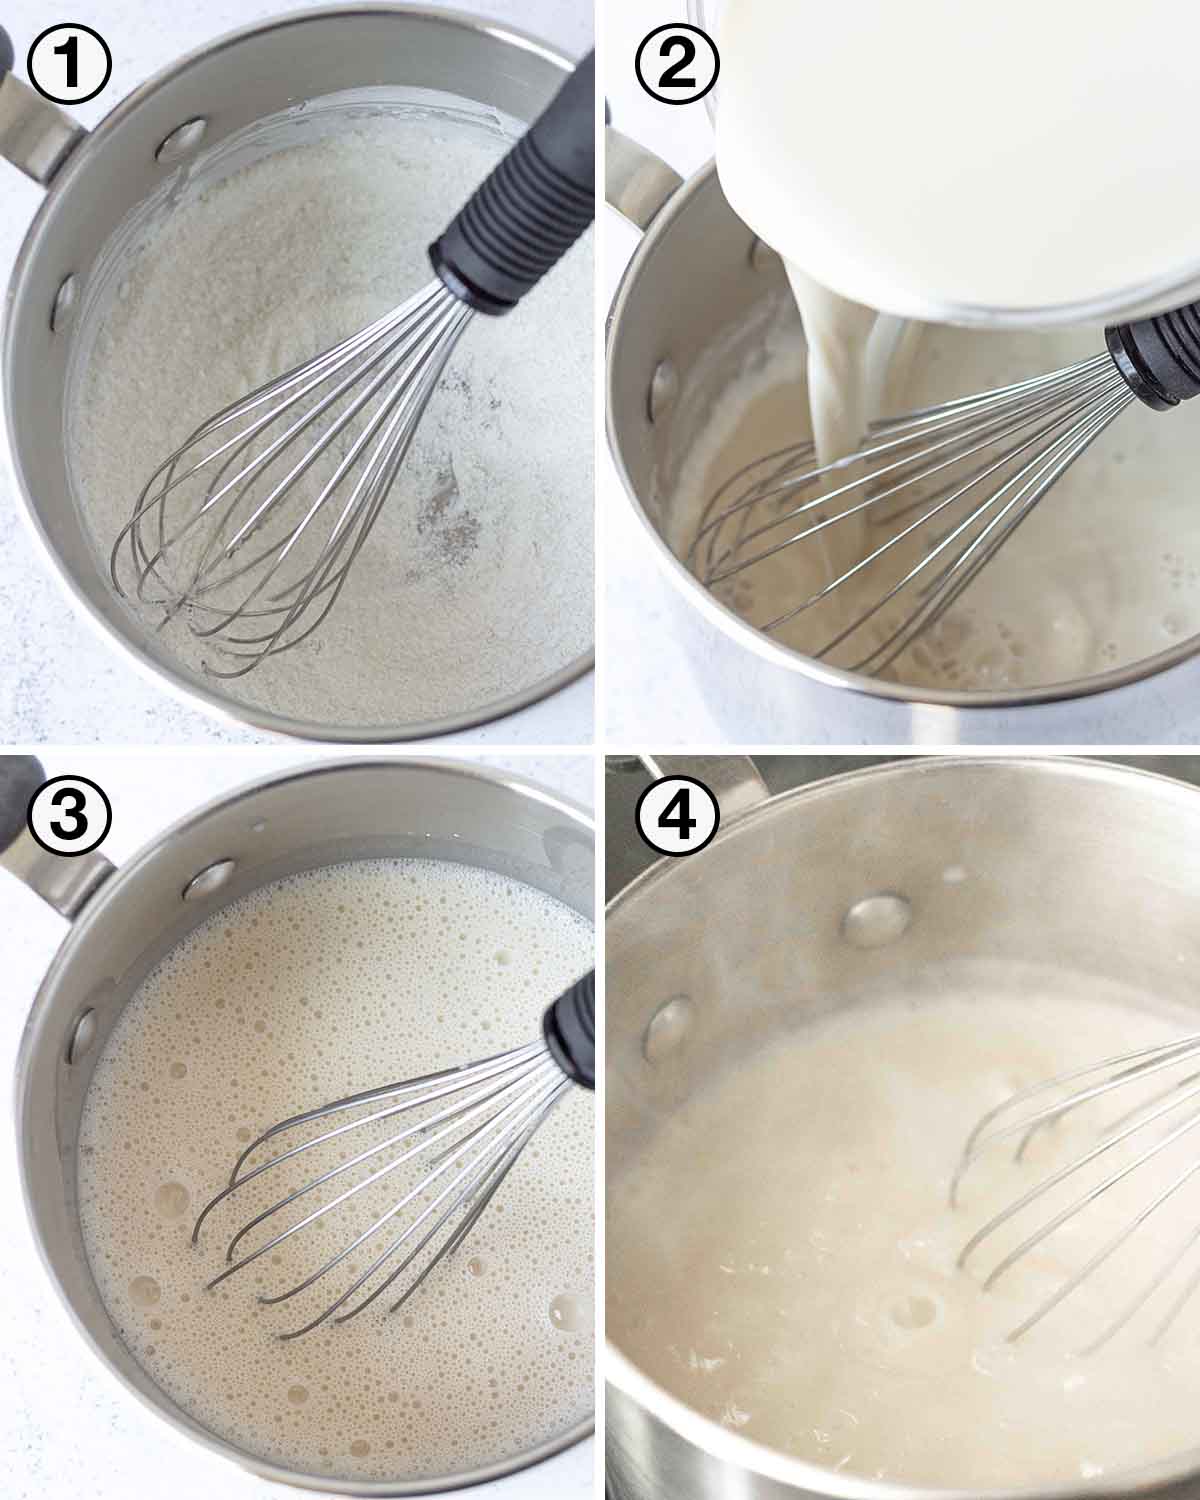 A collage of four images showing the first sequence of steps needed to make vegan vanilla pudding.